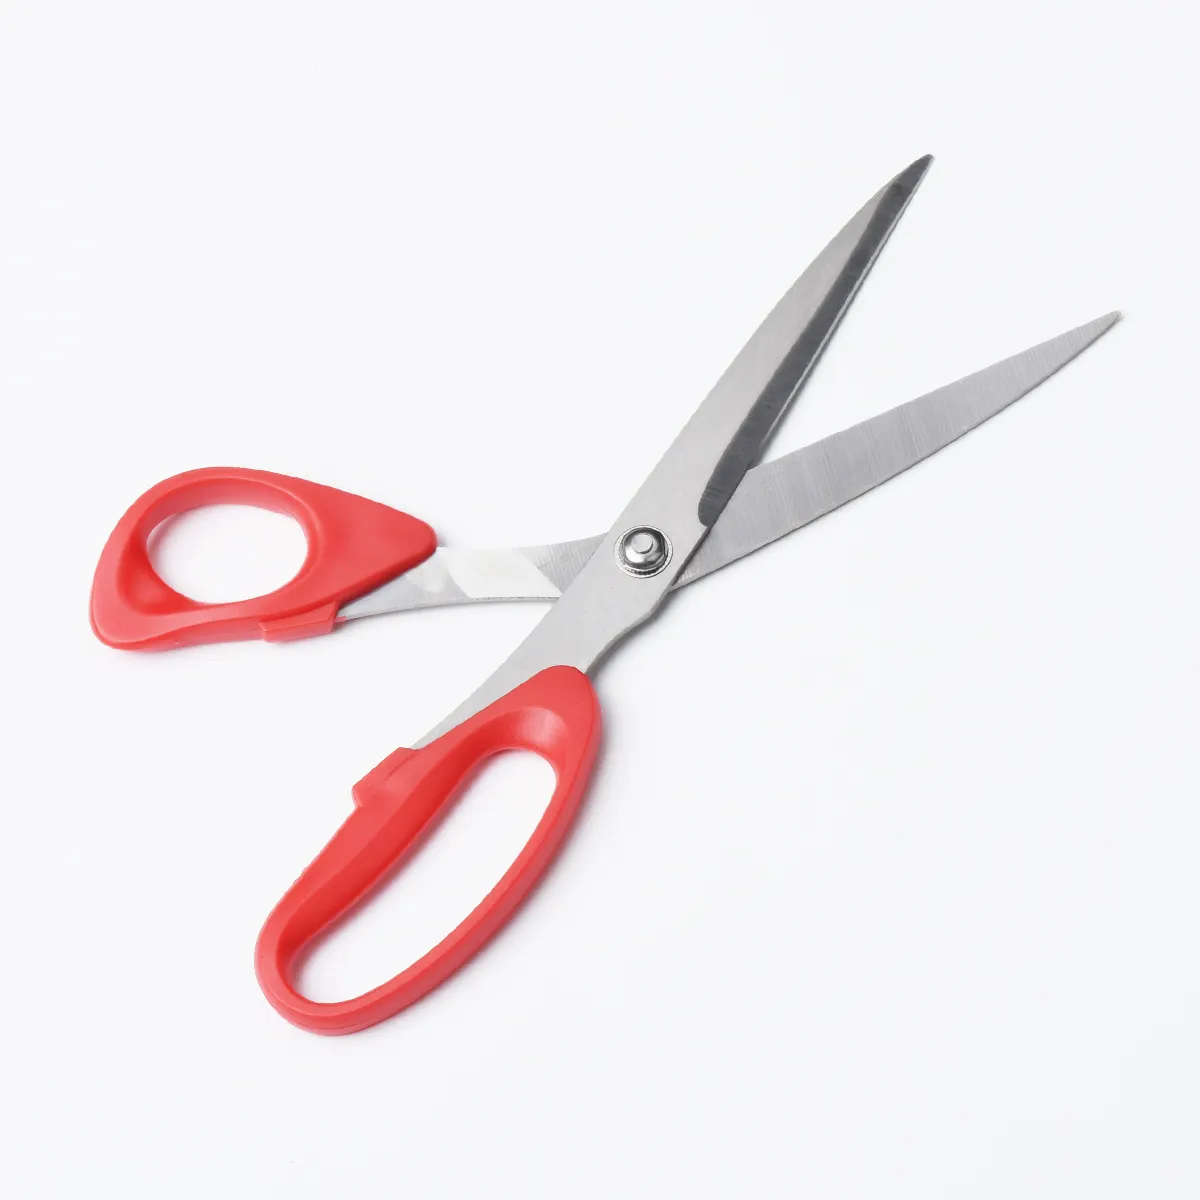 Low price cut fabric crafts professional hand-held sewing scissors